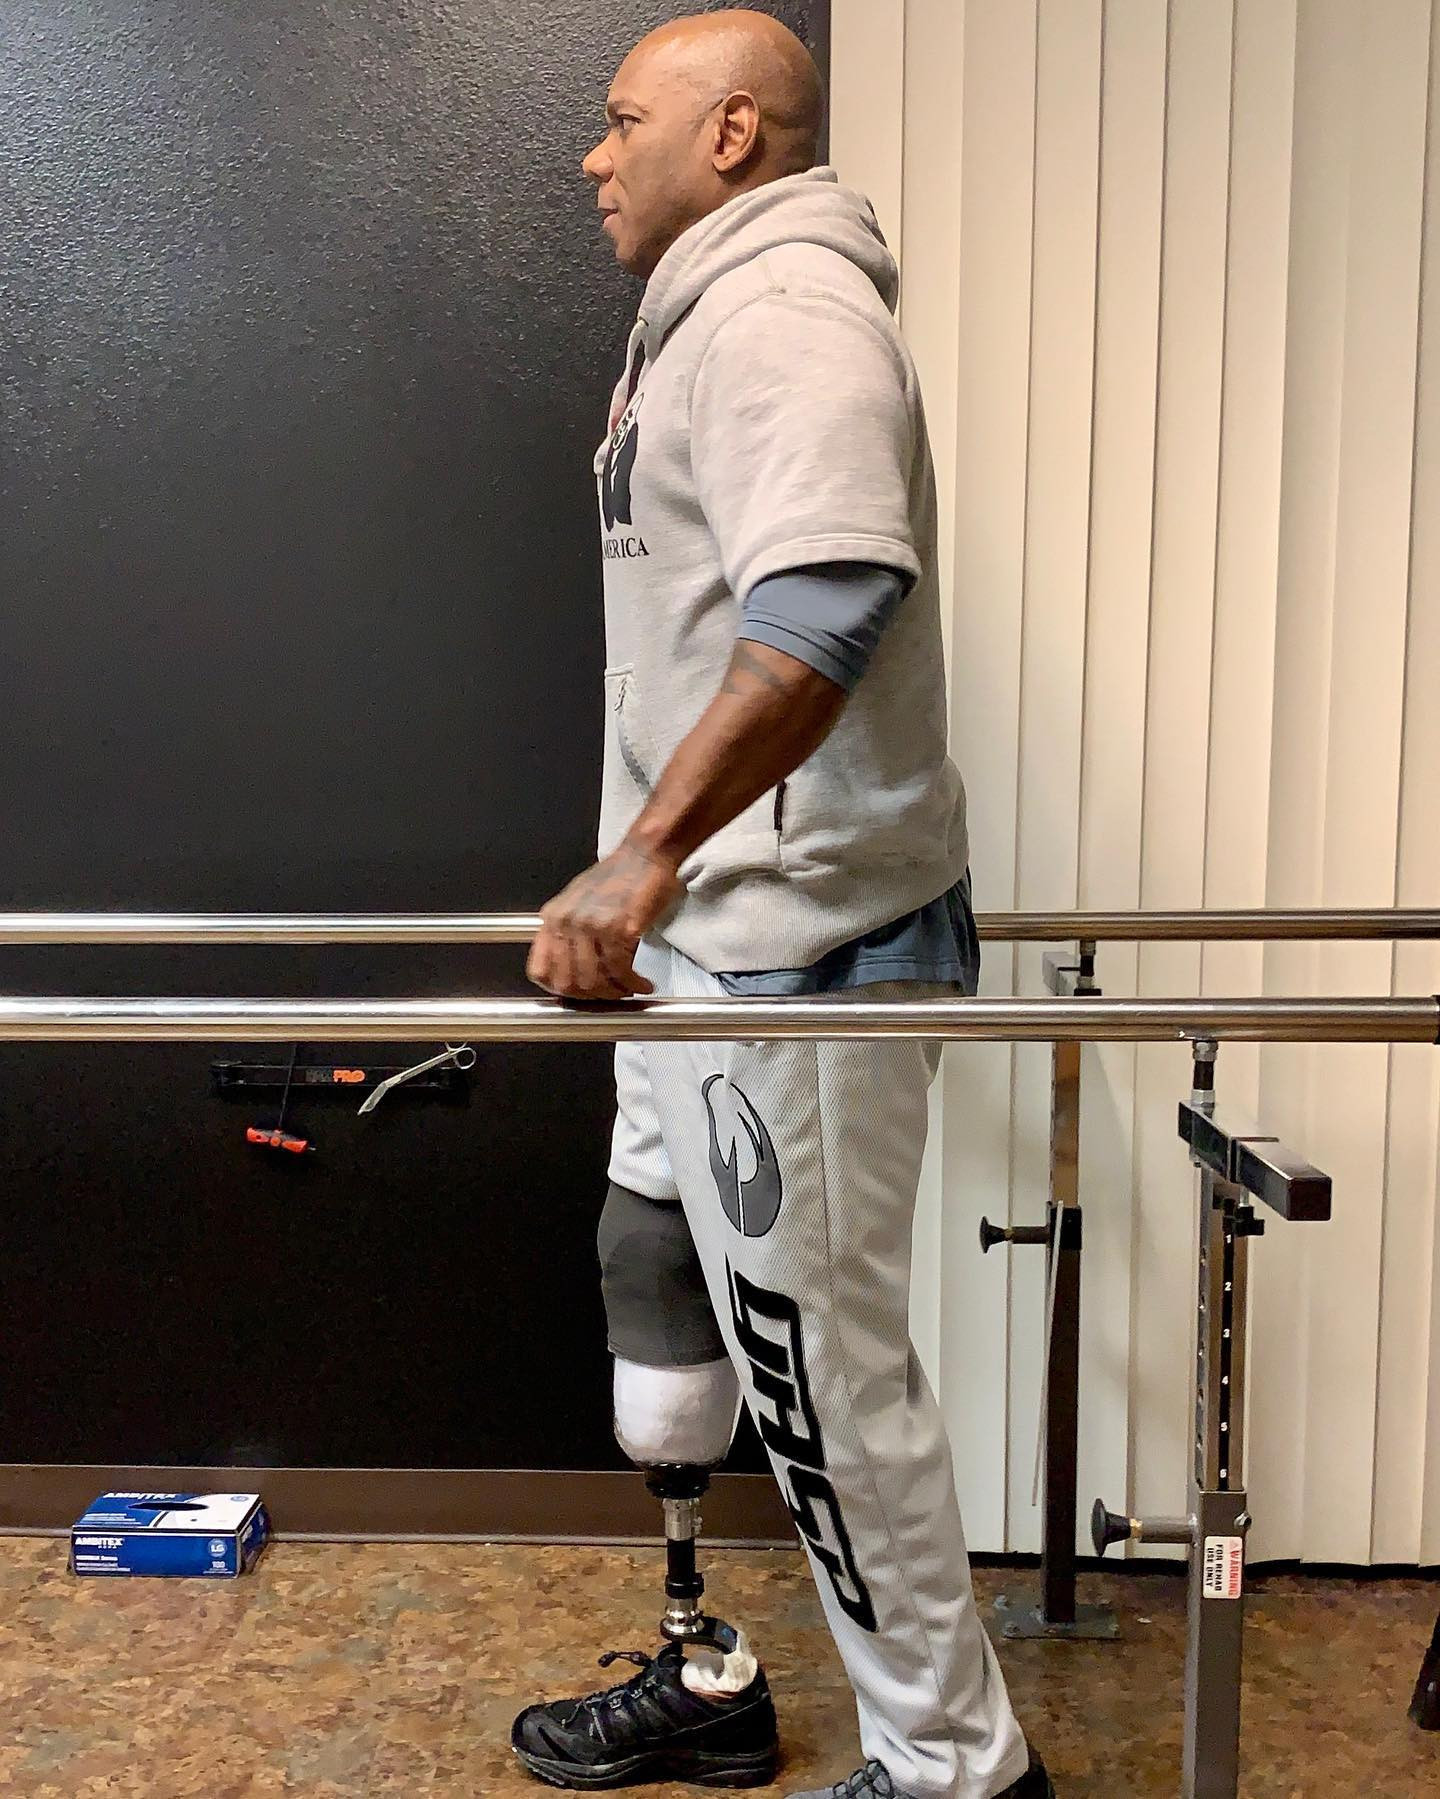 IFBB legend Wheeler begins recovery after losing leg